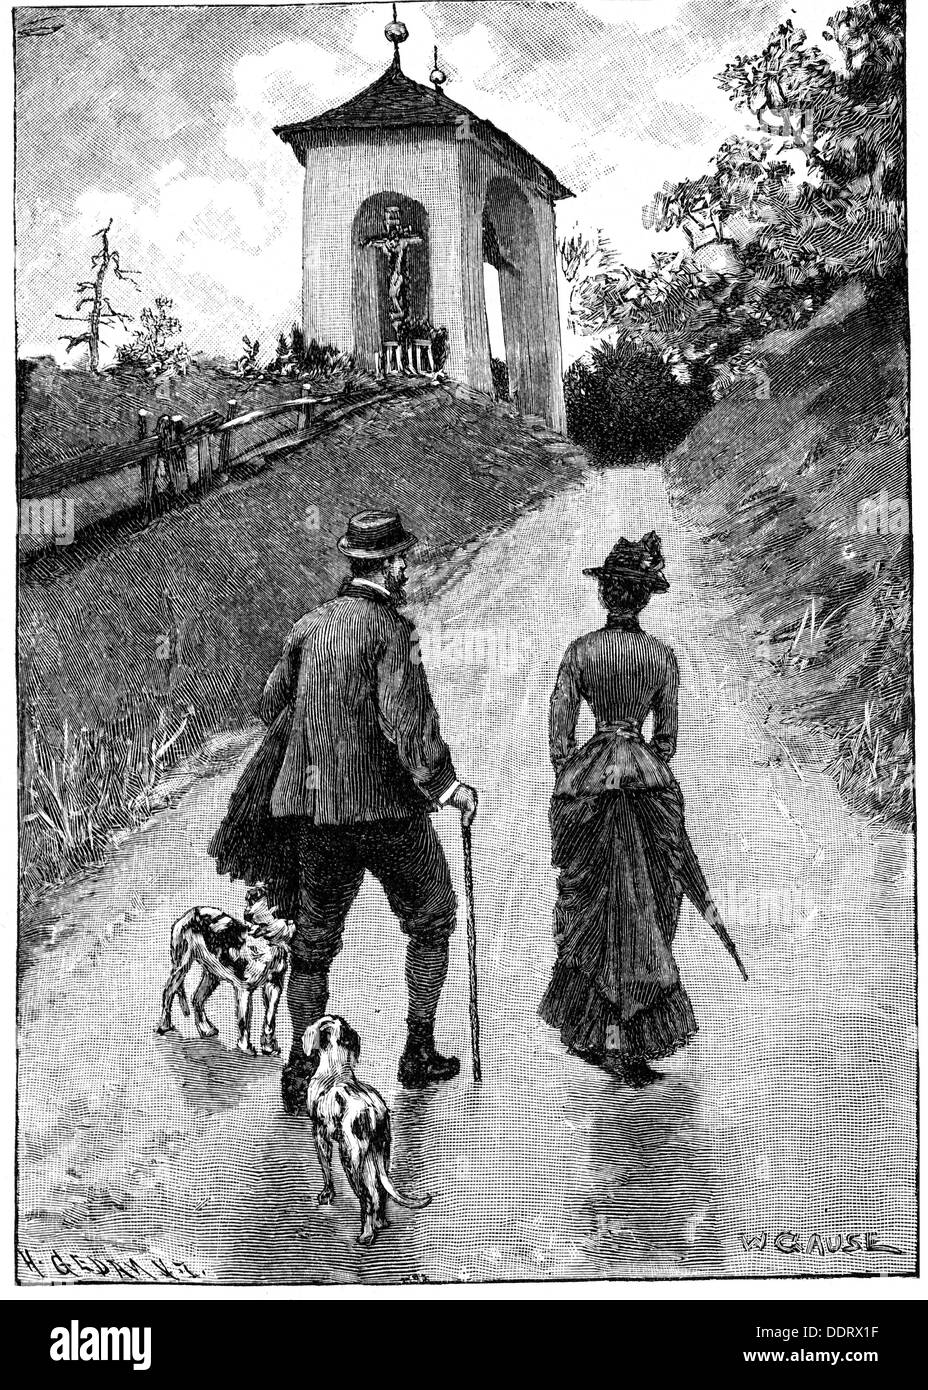 Frederick III, 18.10.1831 - 15.6.1888, German Emperor 9.3. - 15.6.1888, full length, with daughter Princess Victoria on the way to the Maximilian's Chapel near Toblach, Tyrol, September 1887, contemporary wood engraving, Stock Photo